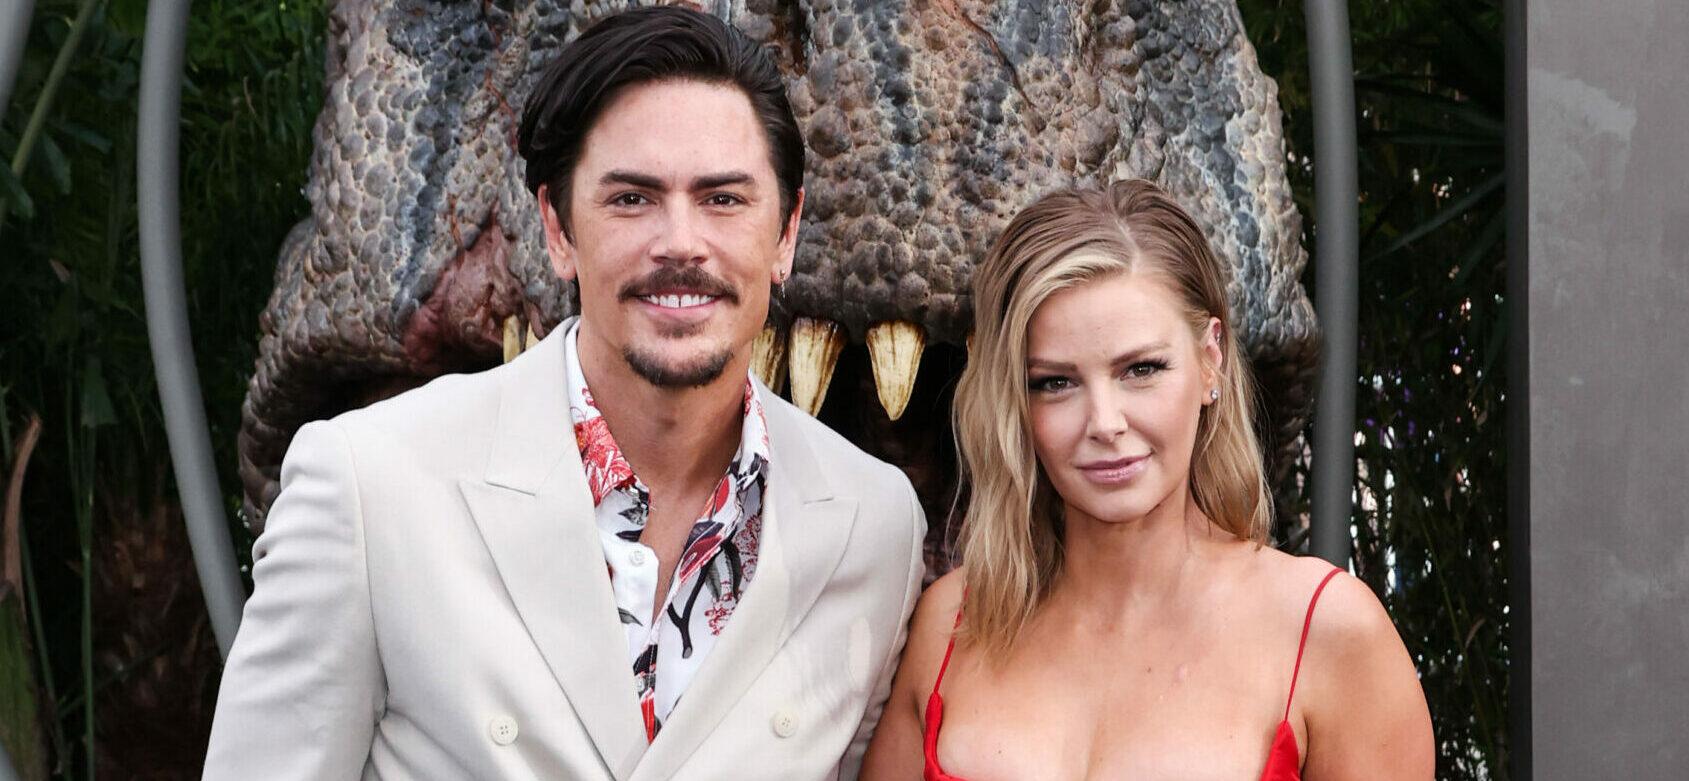 Ariana Madix Explains Why She STILL Chooses To Live With Cheating Ex Tom Sandoval